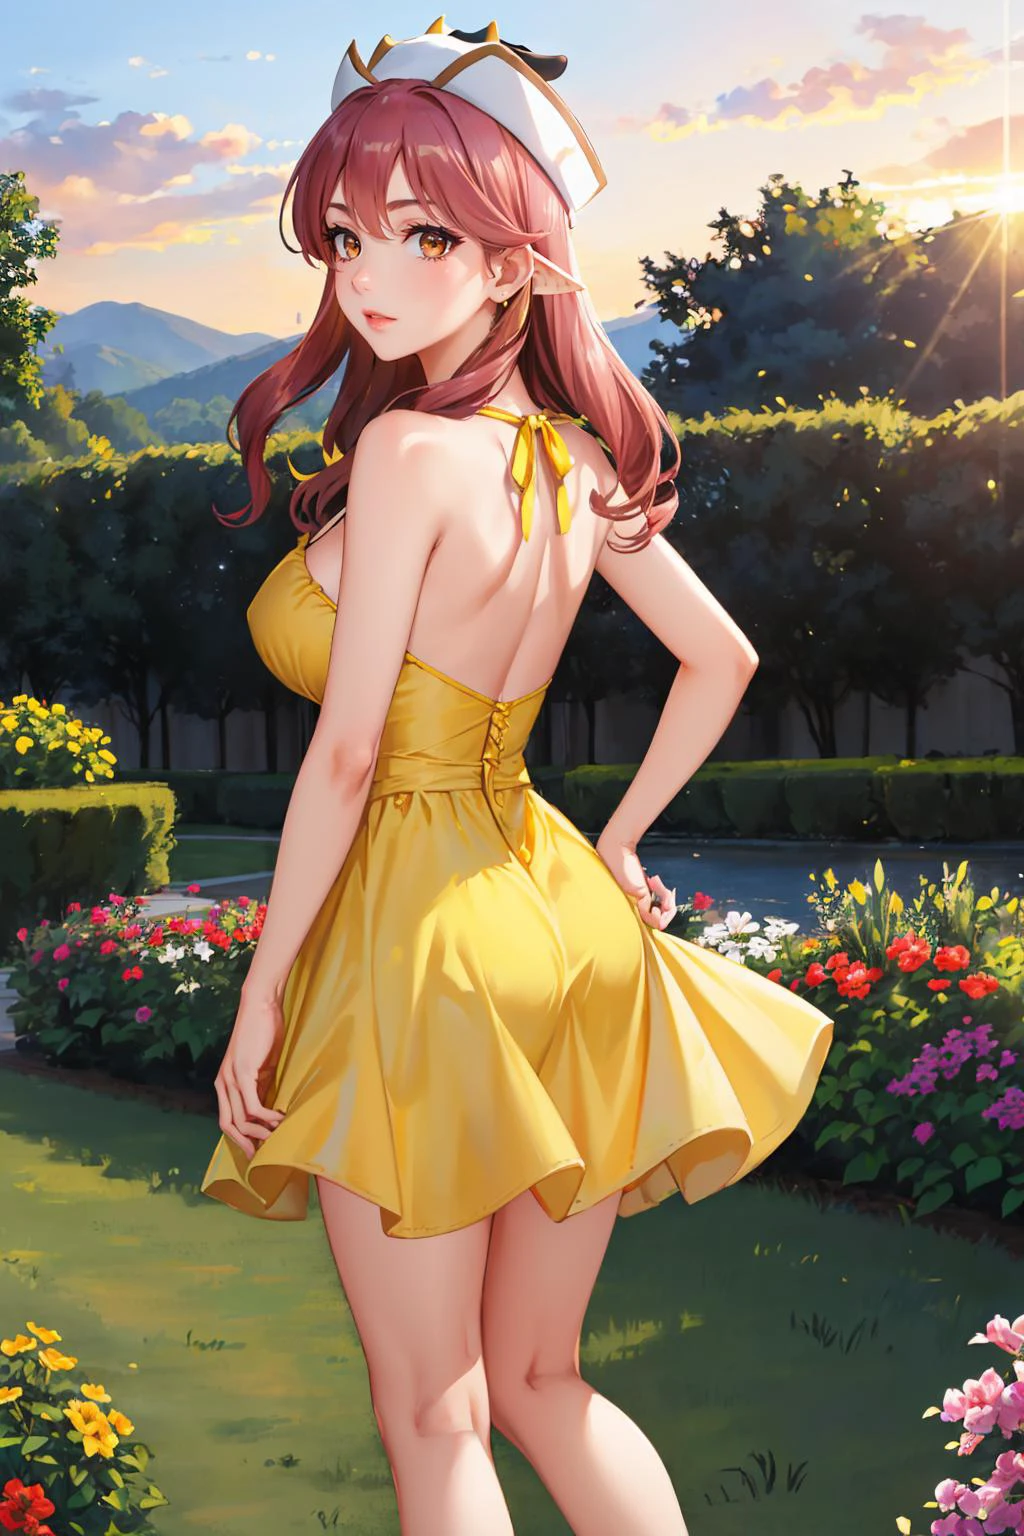 masterpiece, best quality, moo-tan, cow girl, earrings, hat, (yellow sundress:1.2), from behind, large breasts, cow tail, garden, sunset, sky edgYSD,woman wearing a yellow sundress